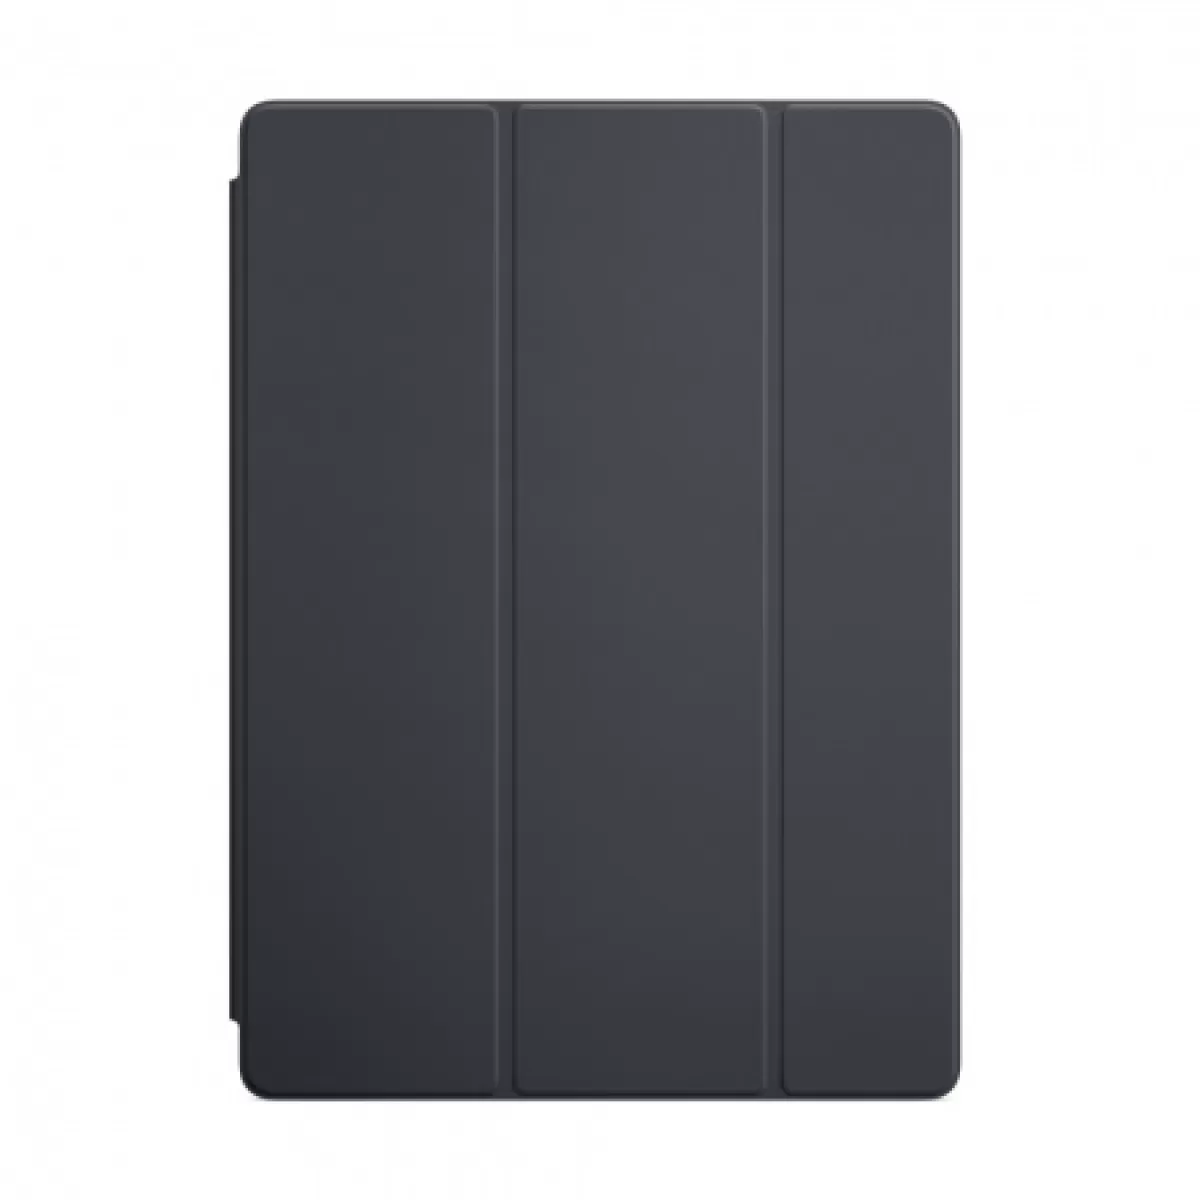 Apple Smart Cover for 12.9inch iPad Pro Charcoal Gray